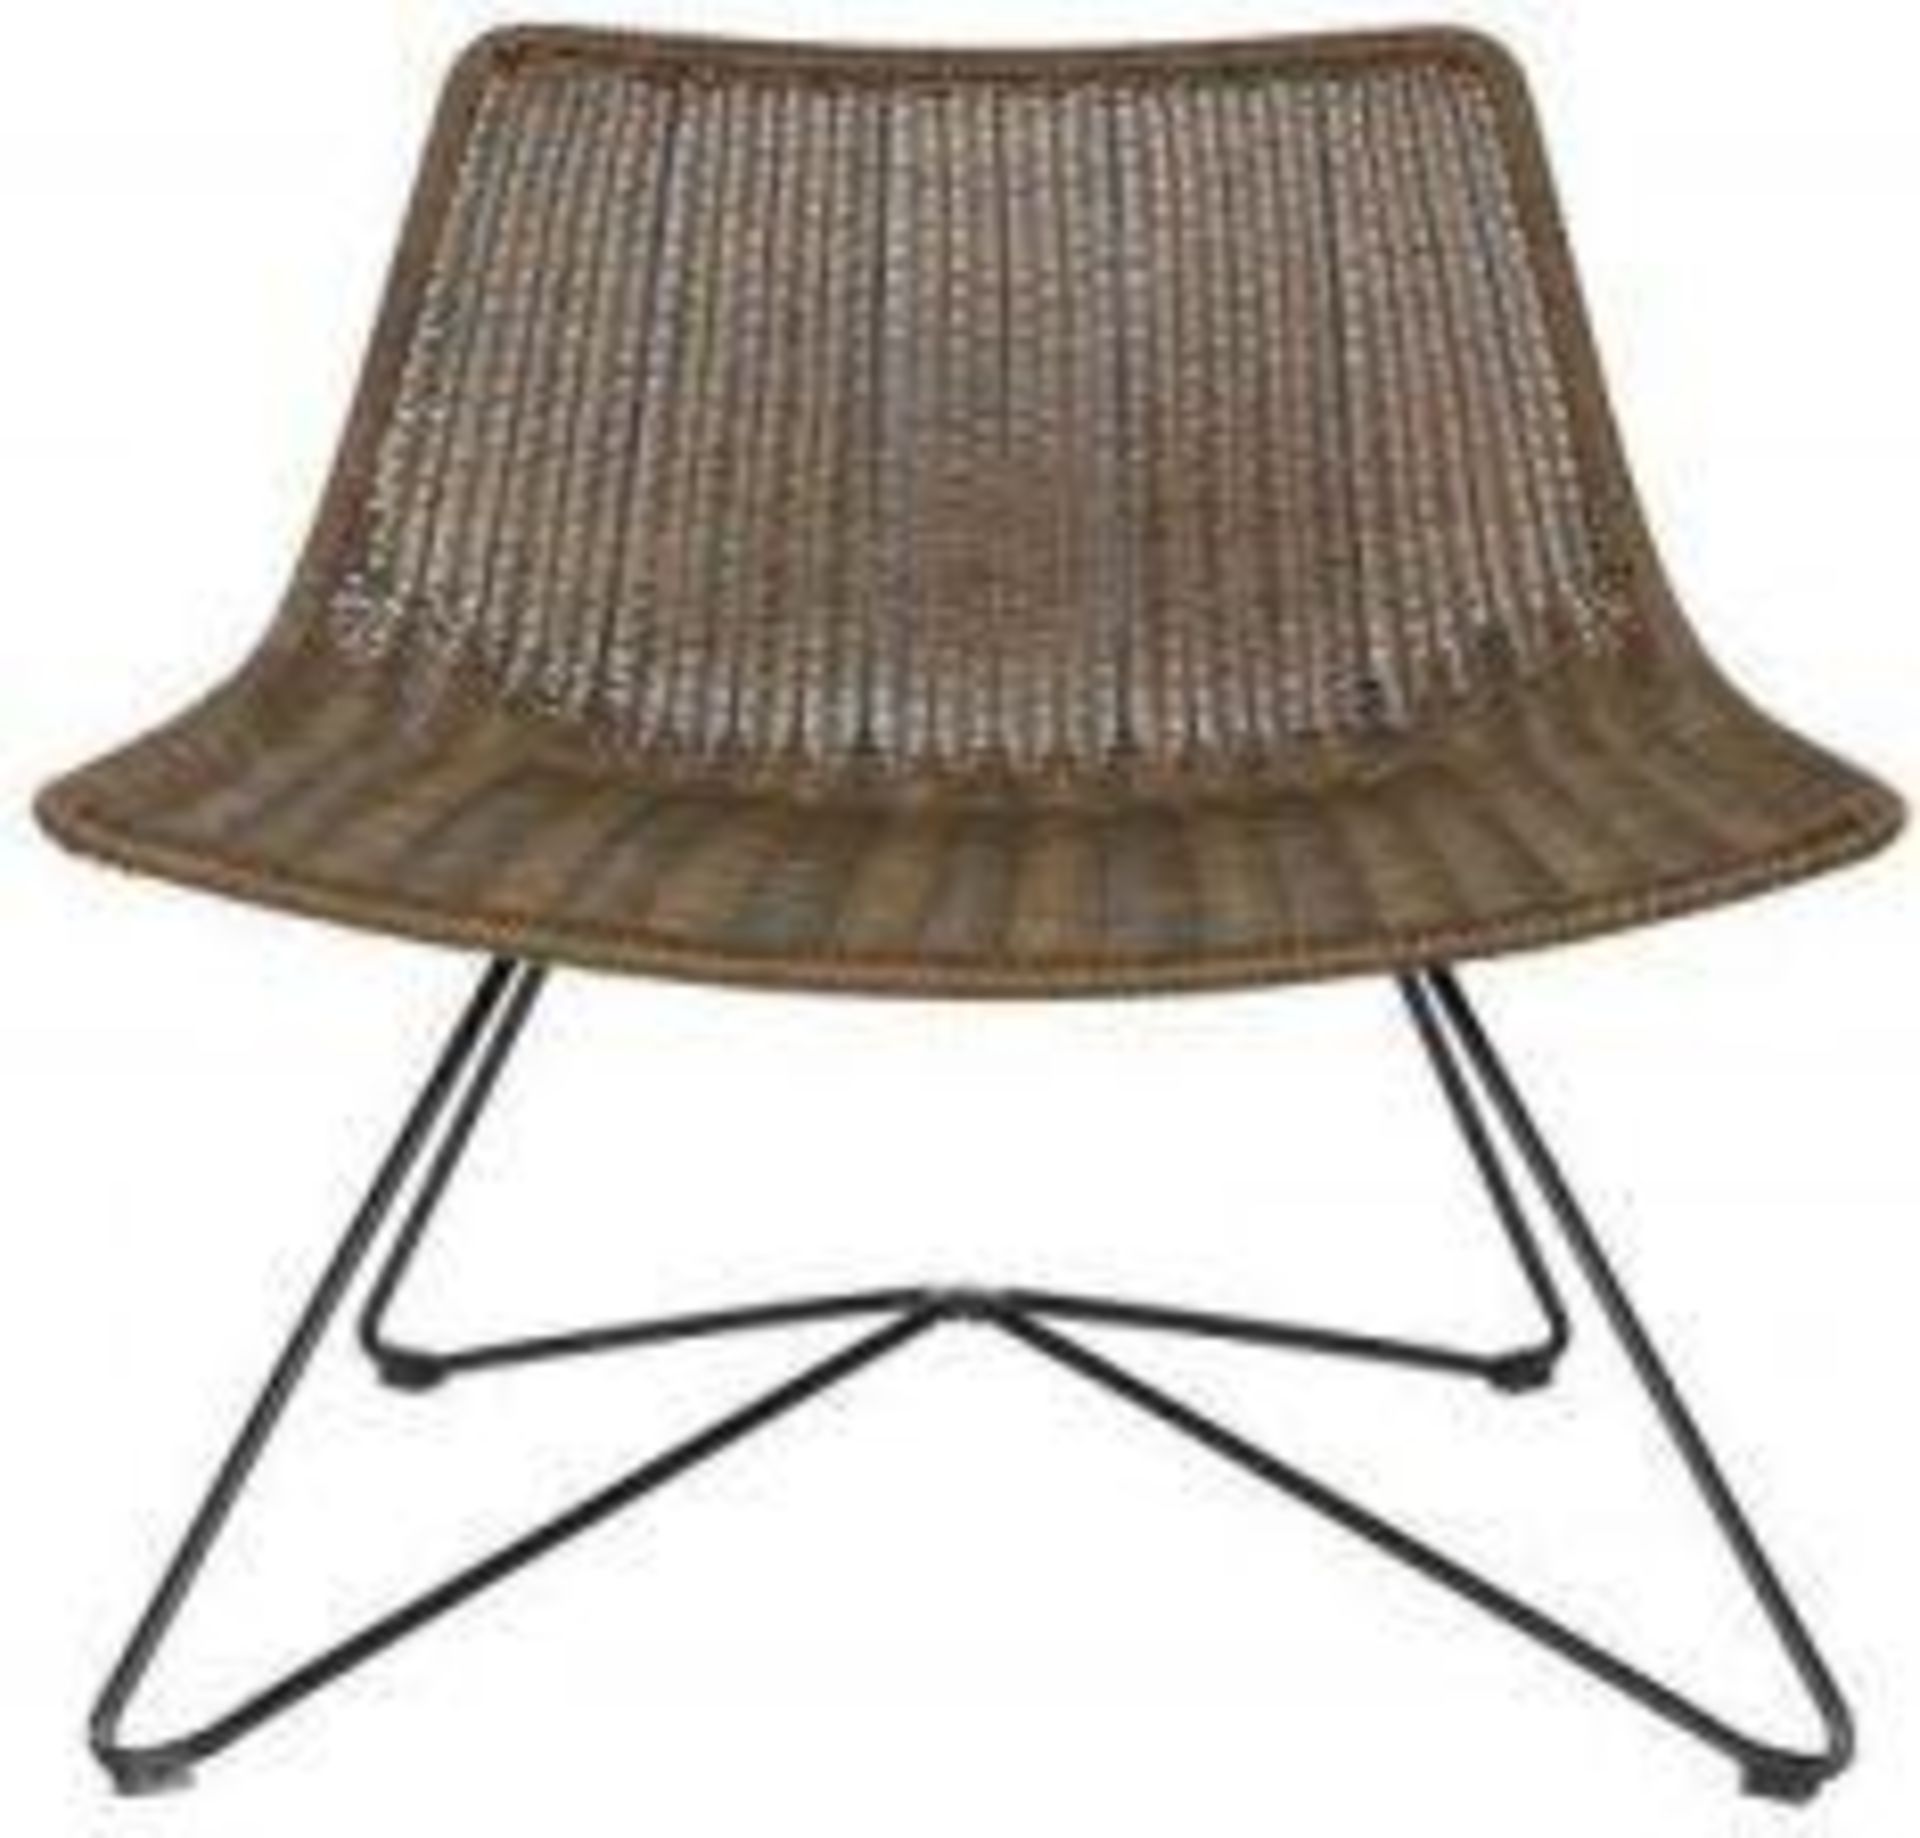 1 x WOOOD Designs 'OTIS' Indoor / Outdoor Chair In BROWN With Metal Base - Dimensions: H77.5 x W65 x - Image 2 of 2